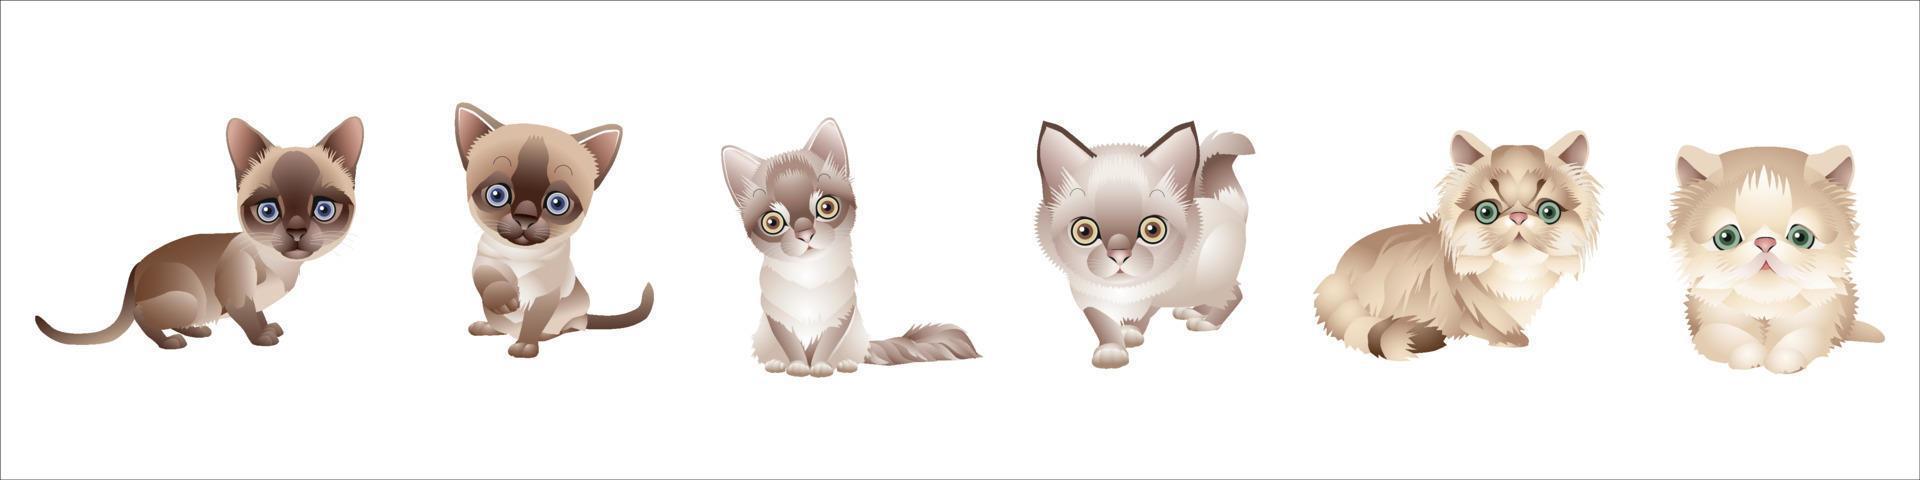 cute cat in different poses vector